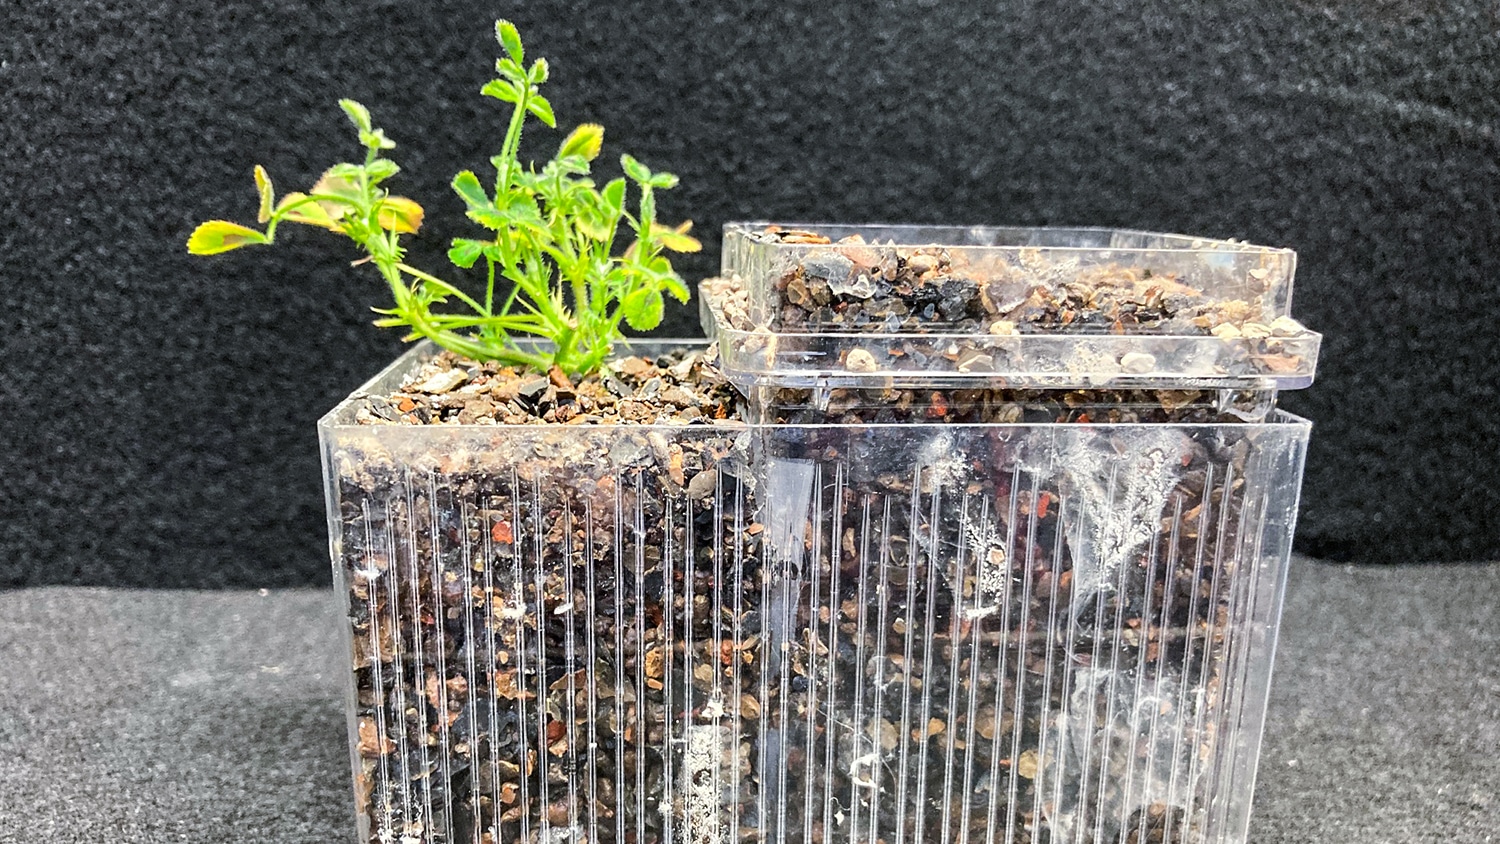 A small green plant grows out of of a clear, plastic container. The plant is on the left half of the container.